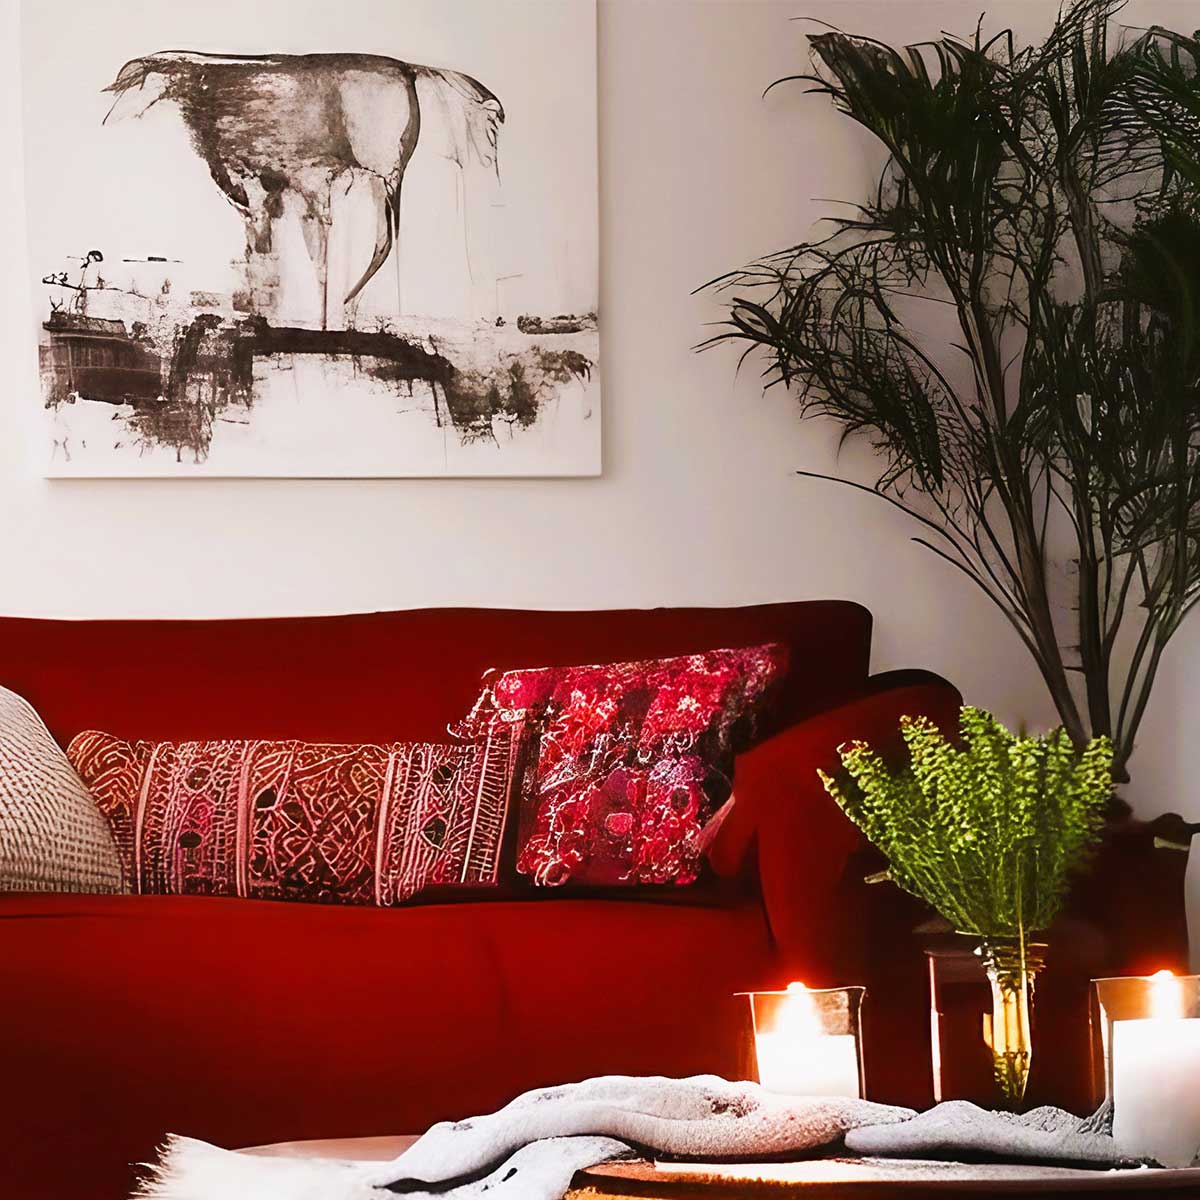 Warm red couch and pillows in living room with abstract art and candles on a coffee table.